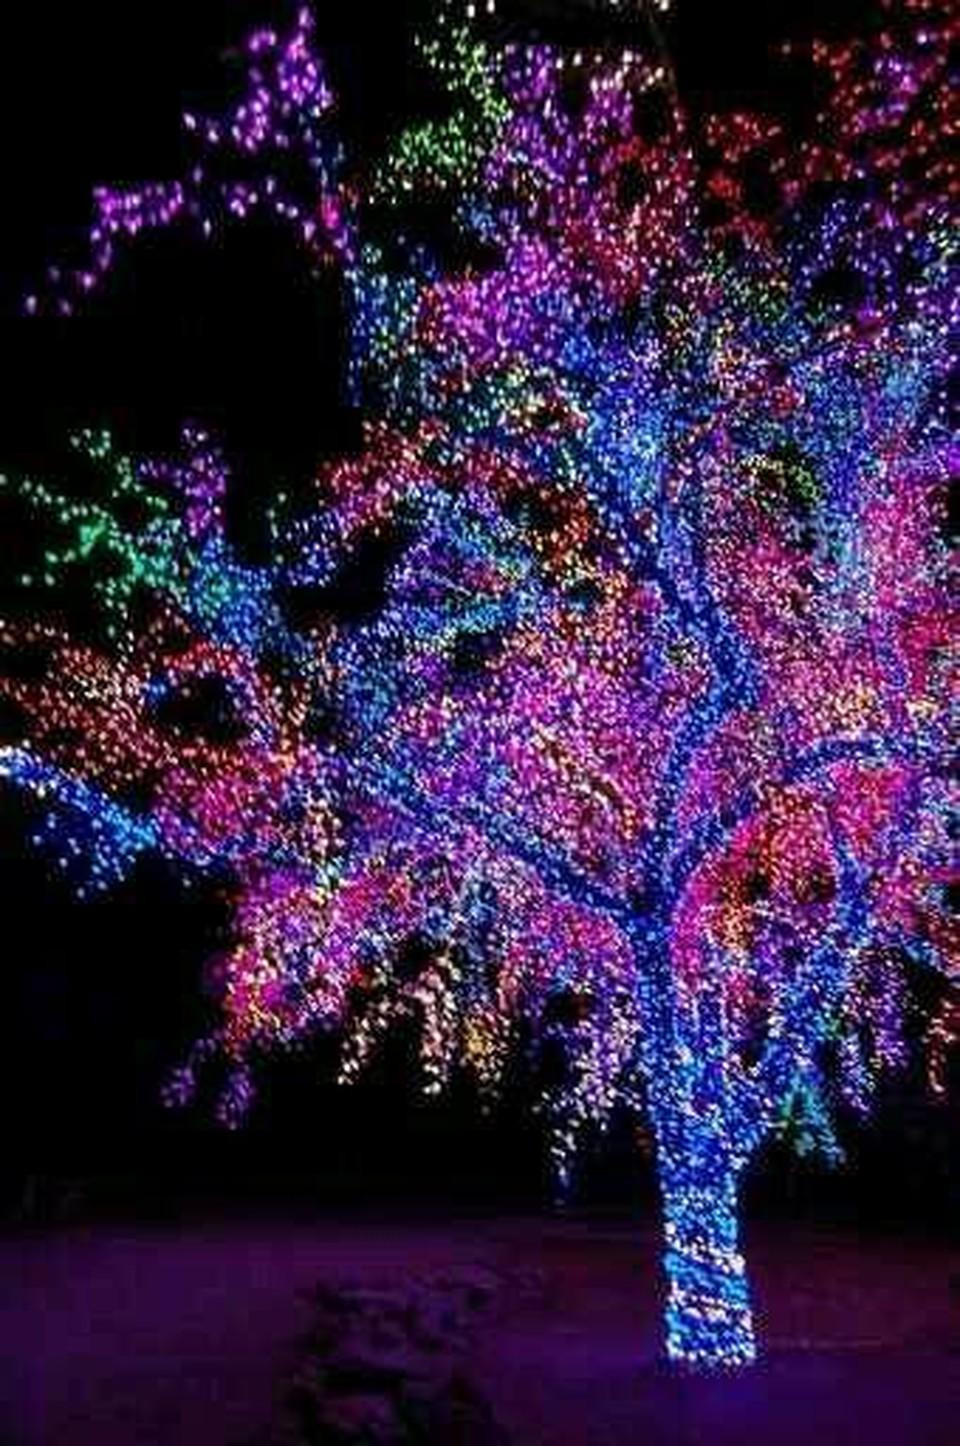 Outdoor Christmas Tree With Lights
 Mind blowing Christmas Lights Ideas for Outdoor Christmas